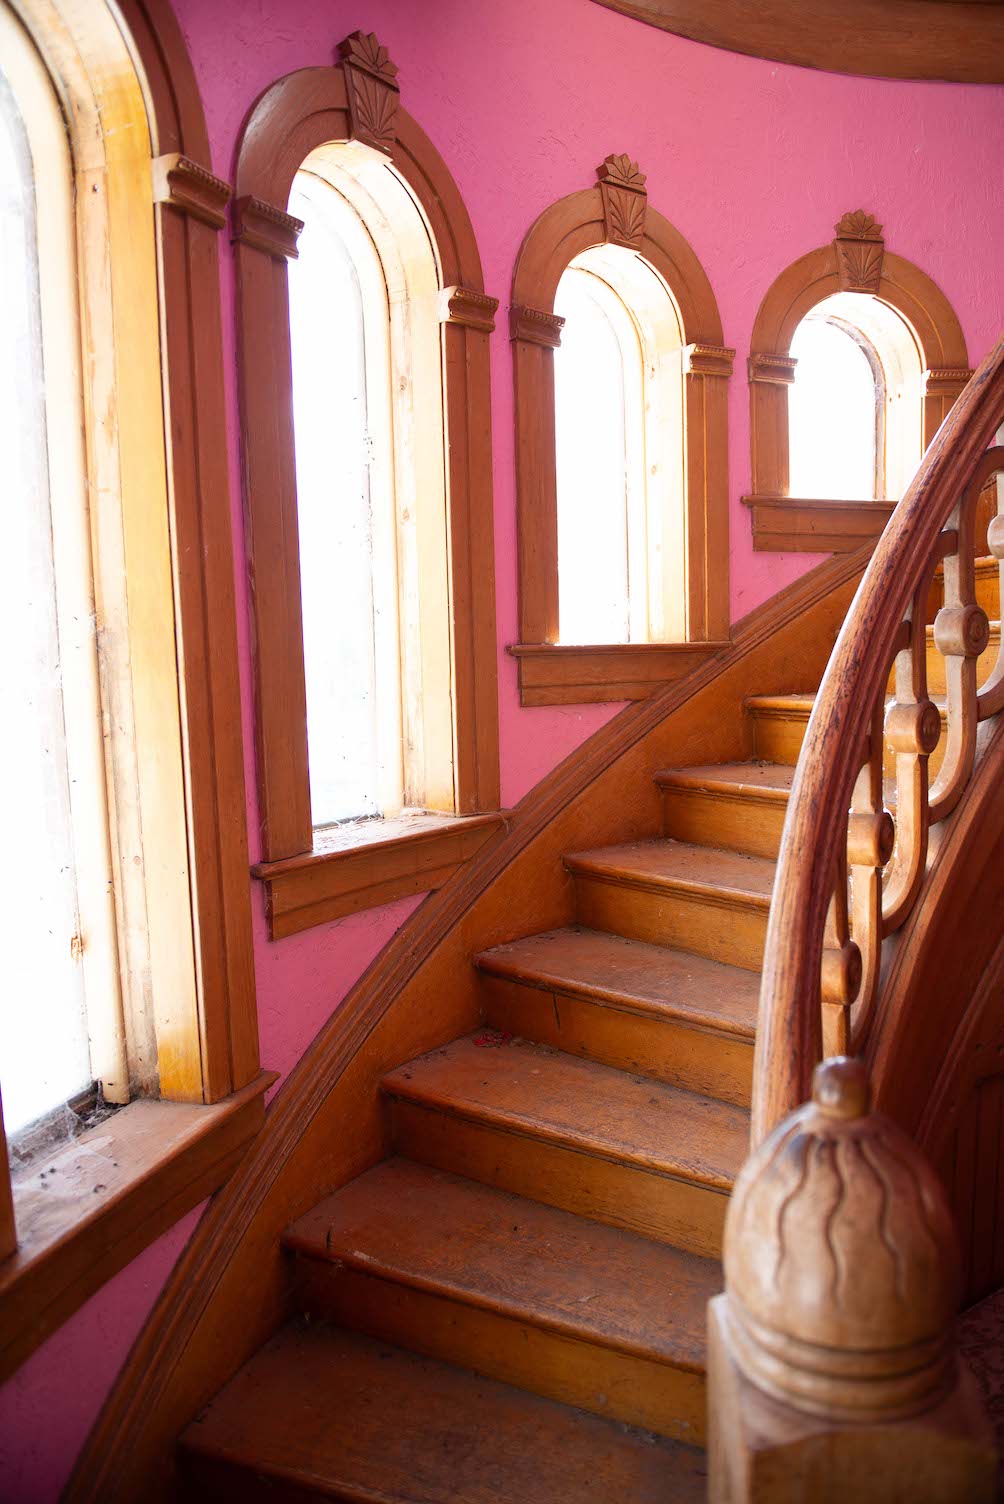 A wooden spiral staircase in Hartman Castle, a historic home in Gunnison, CO